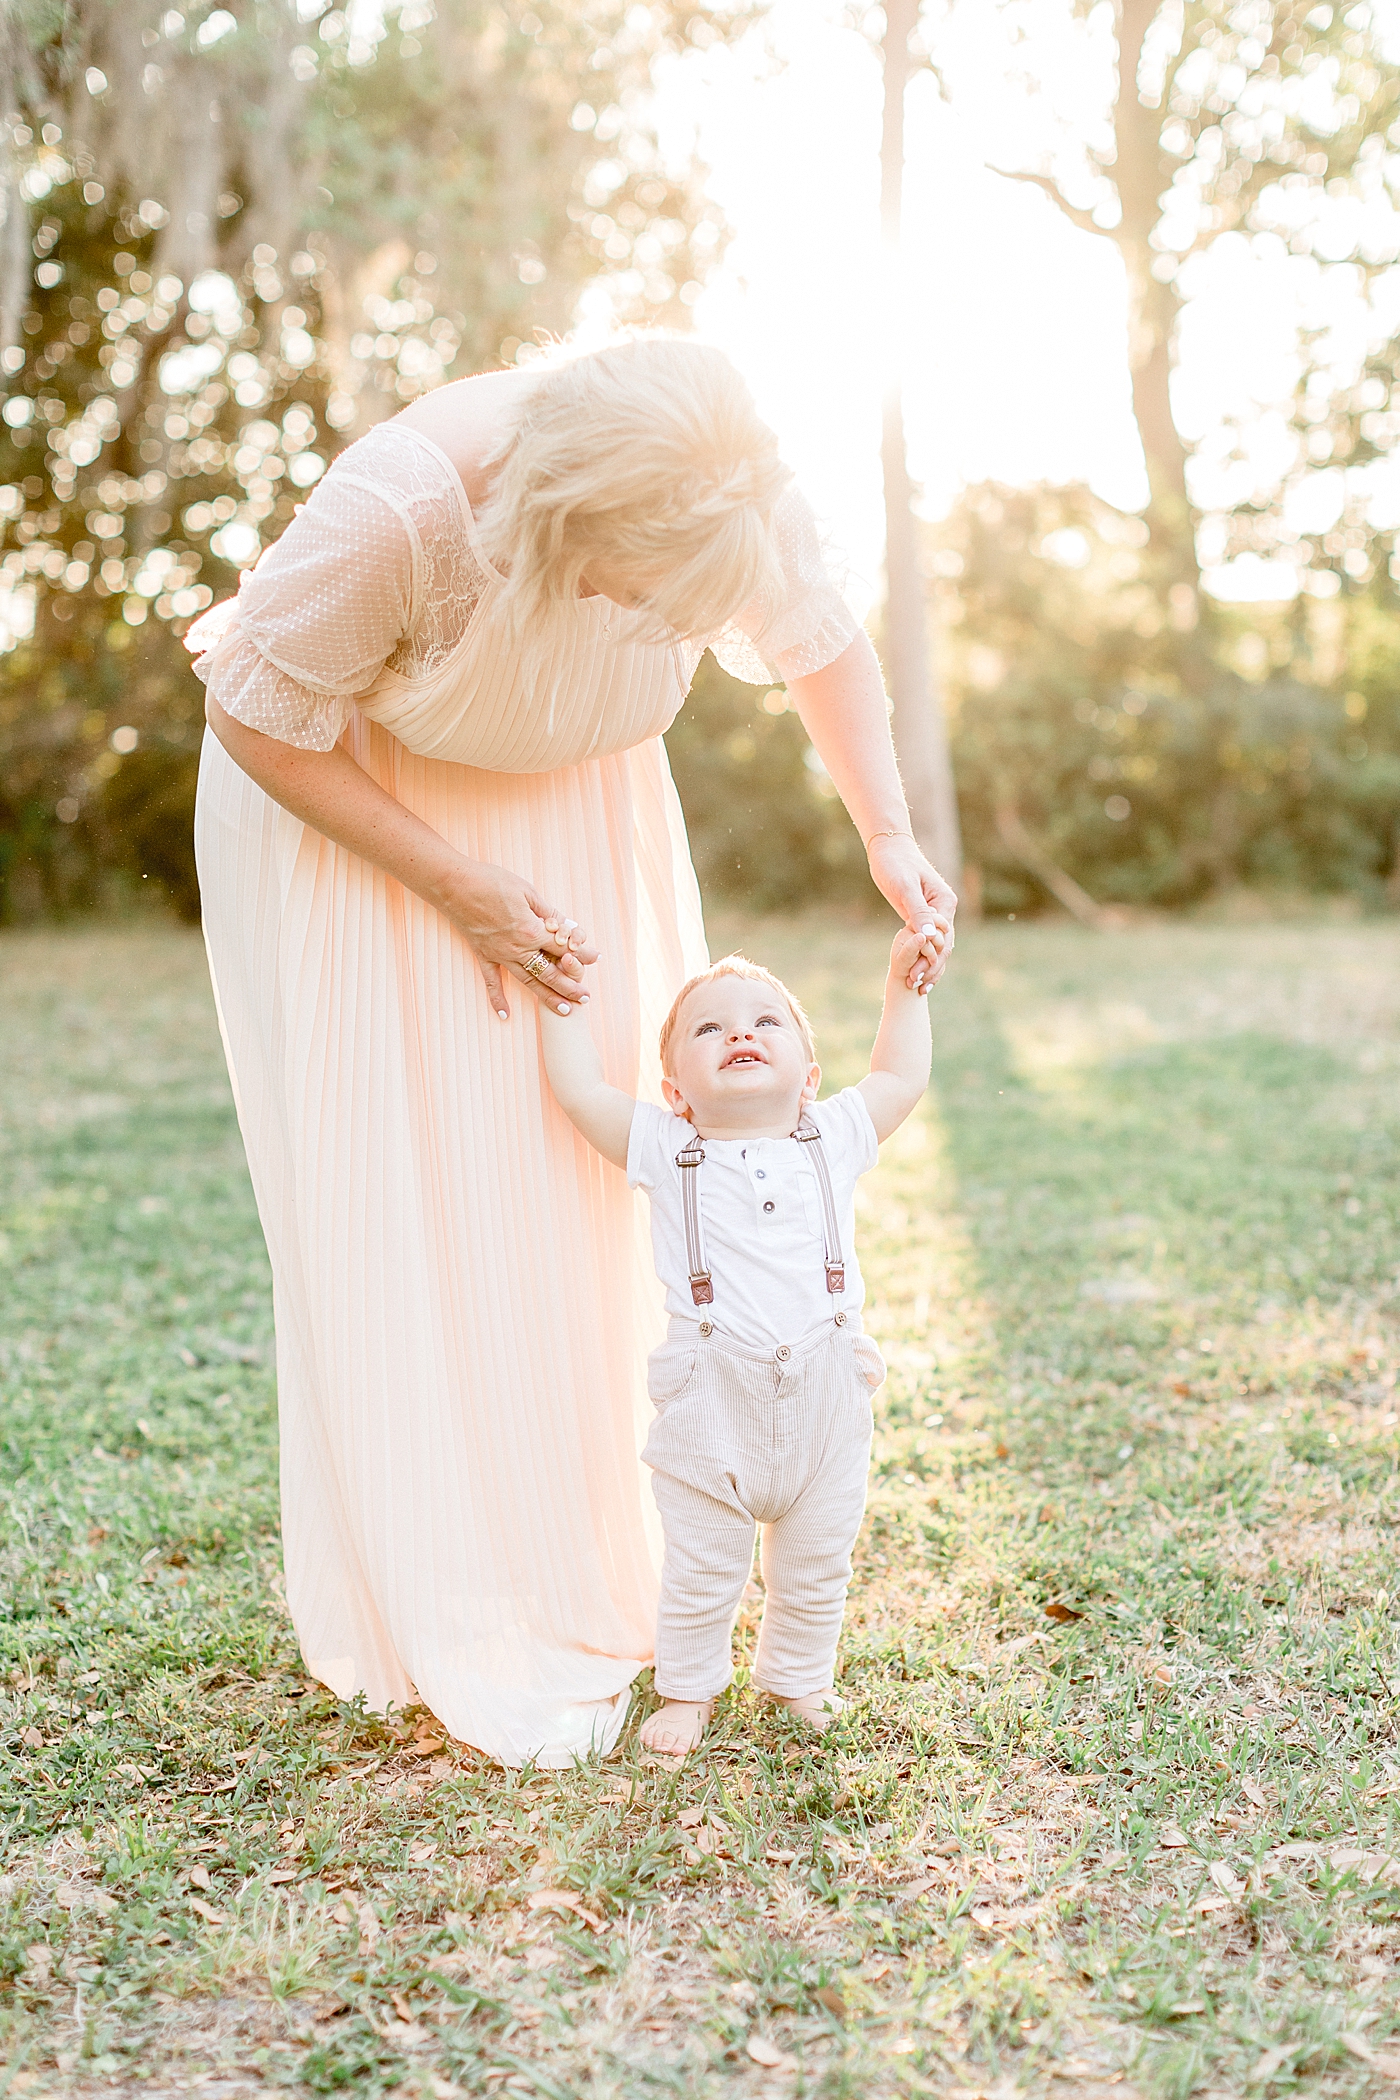  One year old son looking up at his Mom. Photo by Brittany Elise Photography.